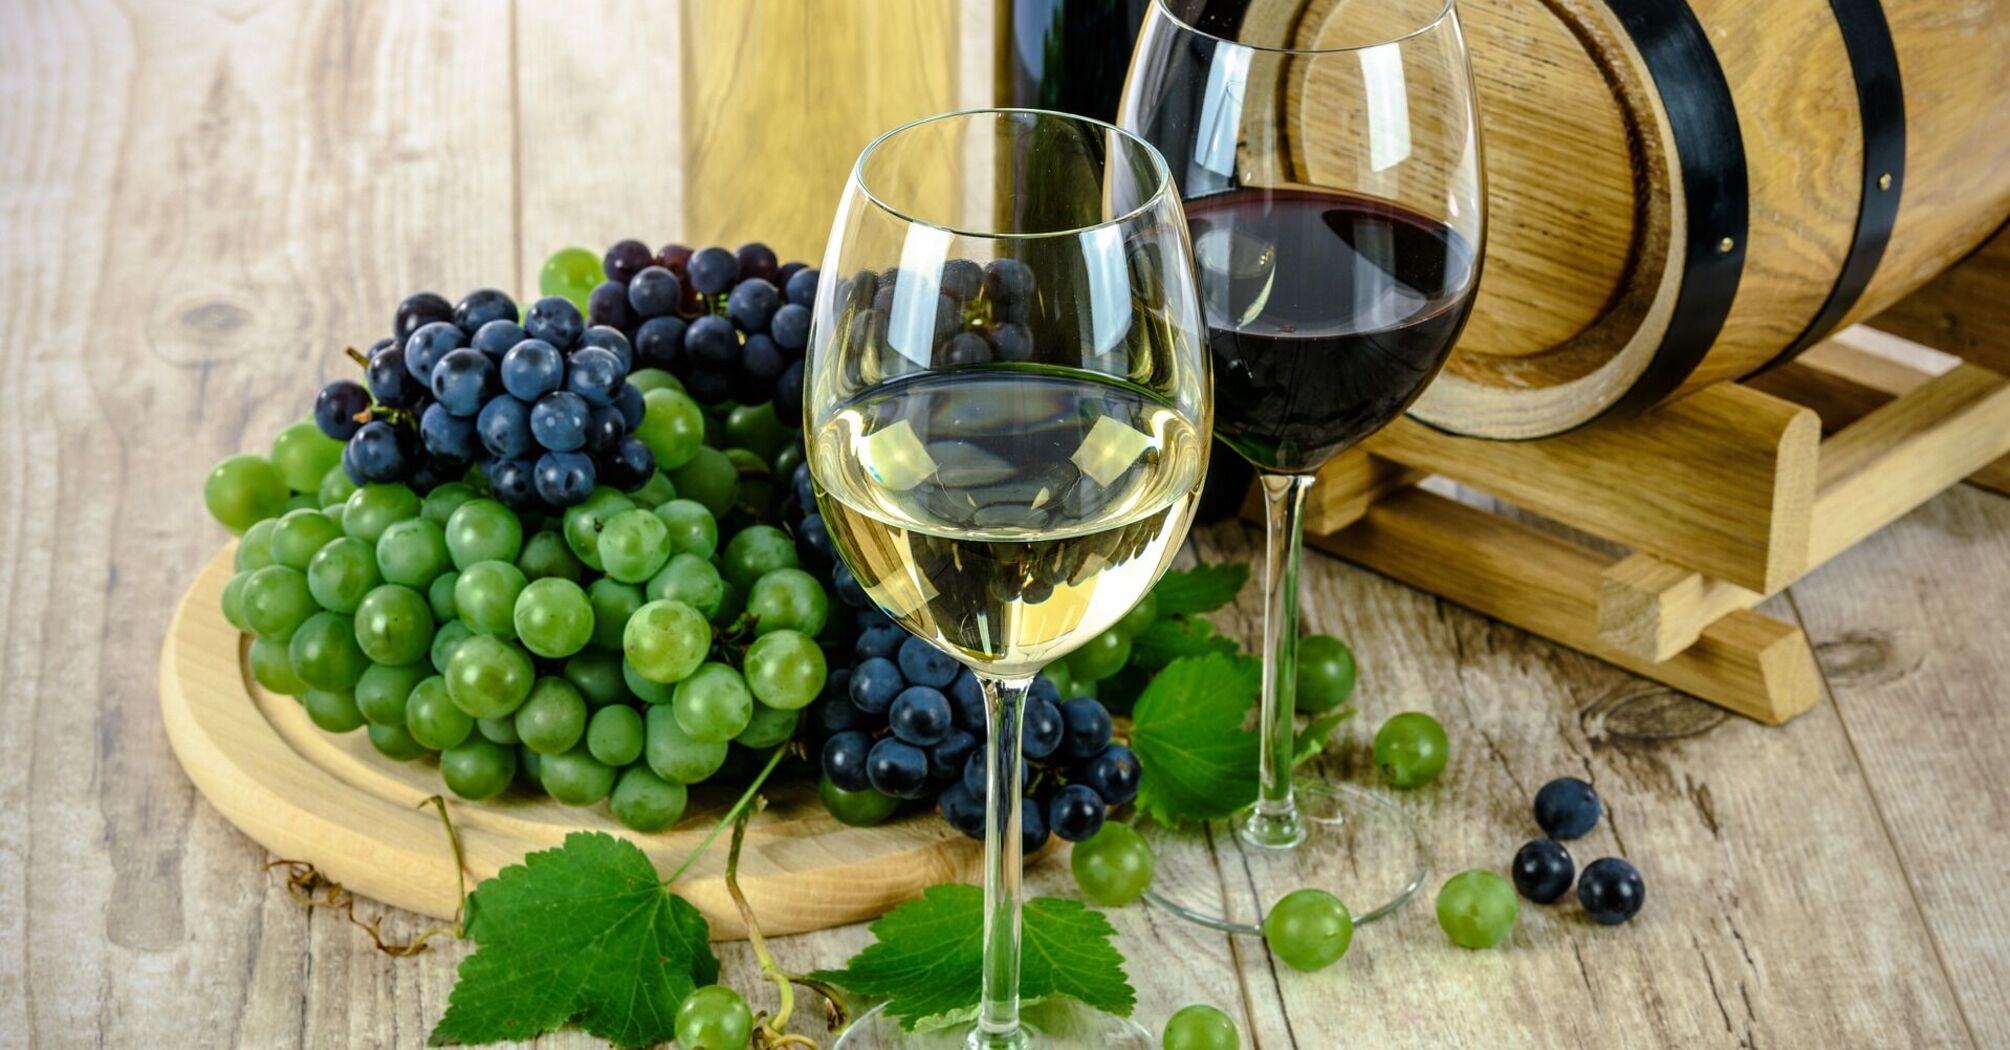 A glass of white wine and a glass of red wine with bunches of green and blue grapes, leaves, a wine bottle, and a wooden barrel on a wooden surface